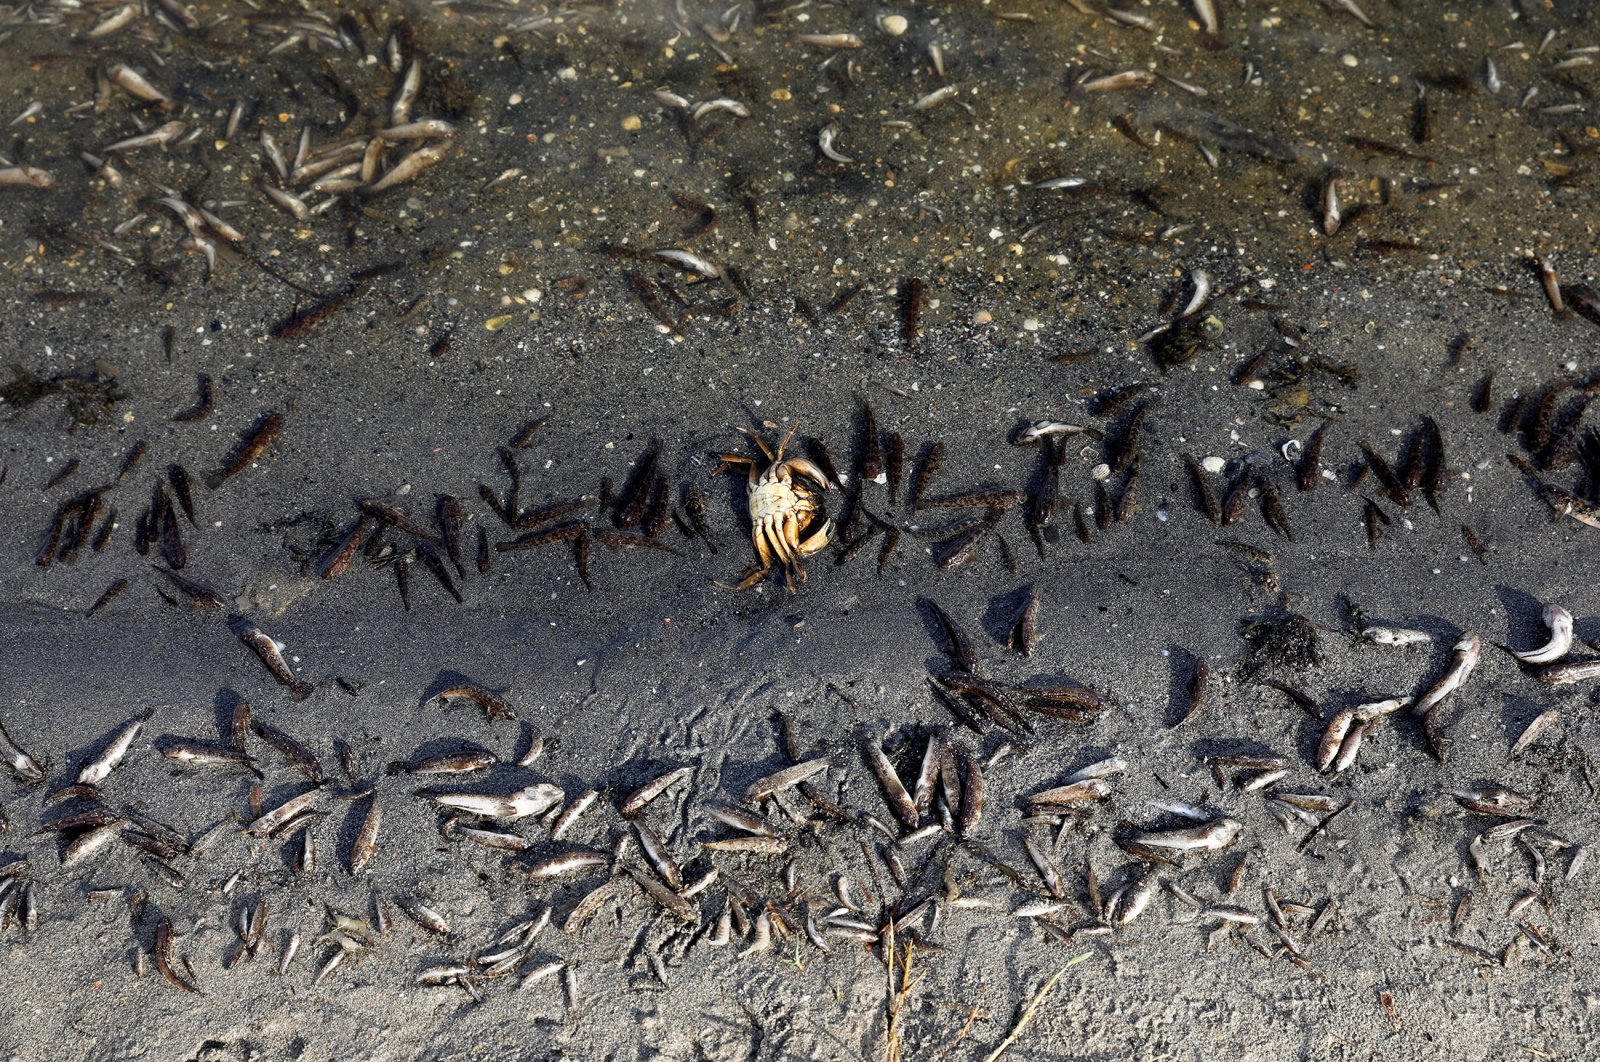 For the fourth day, dead fish continue to appear on the beaches of La Manga del Mar Menor, Murcia, Spain, Aug. 21, 2021. (Reuters Photo)